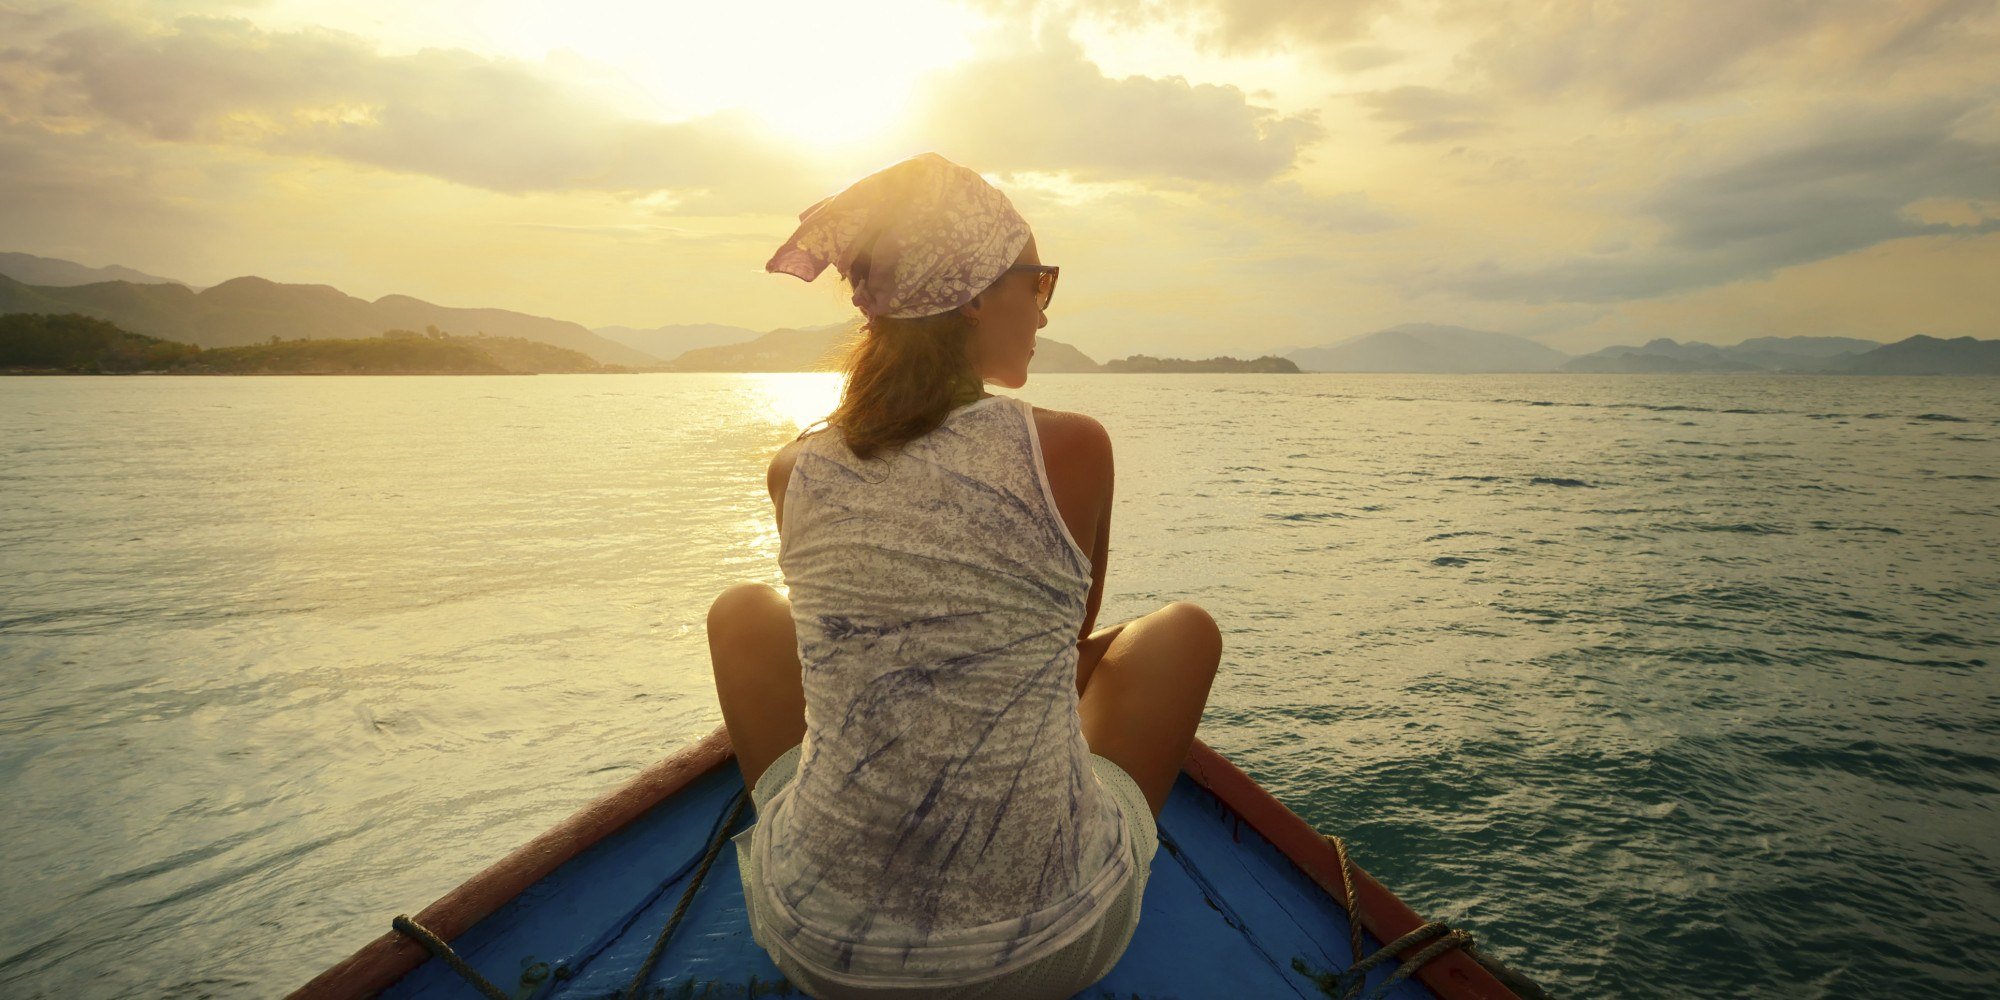 4 Reasons Why Summer Travelling Rekindles Your Soul